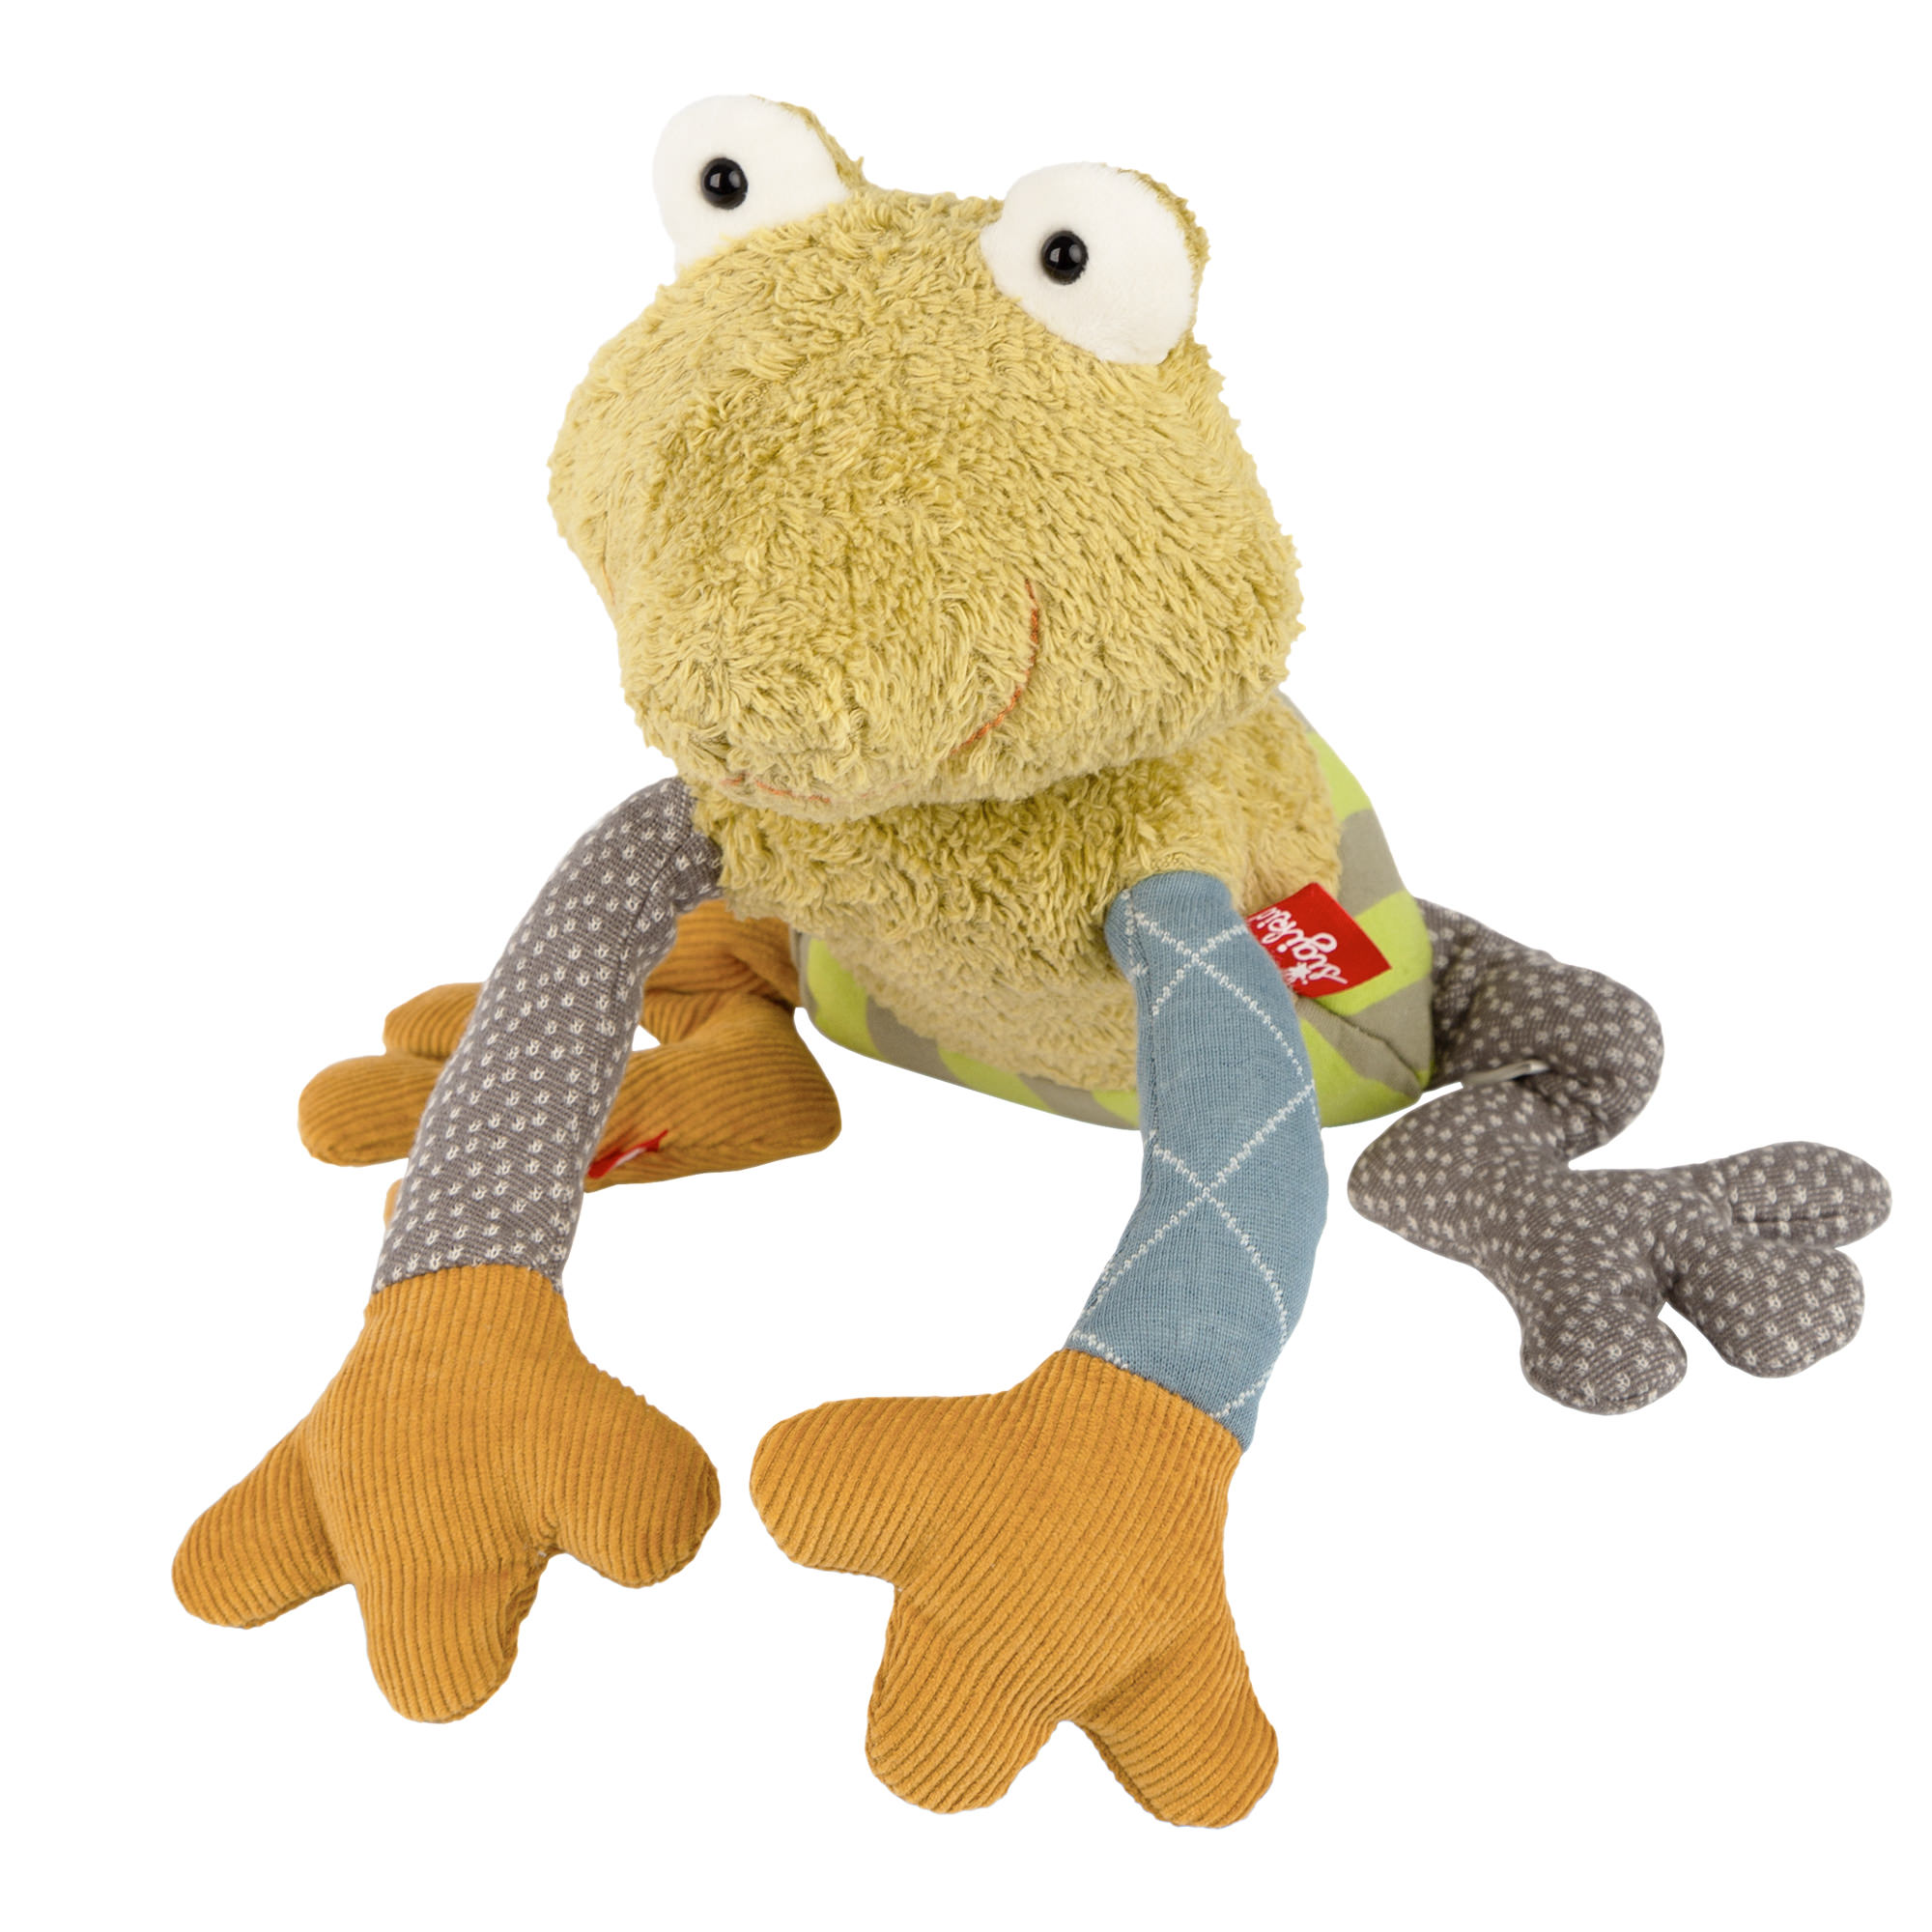 Patchwork soft toy frog